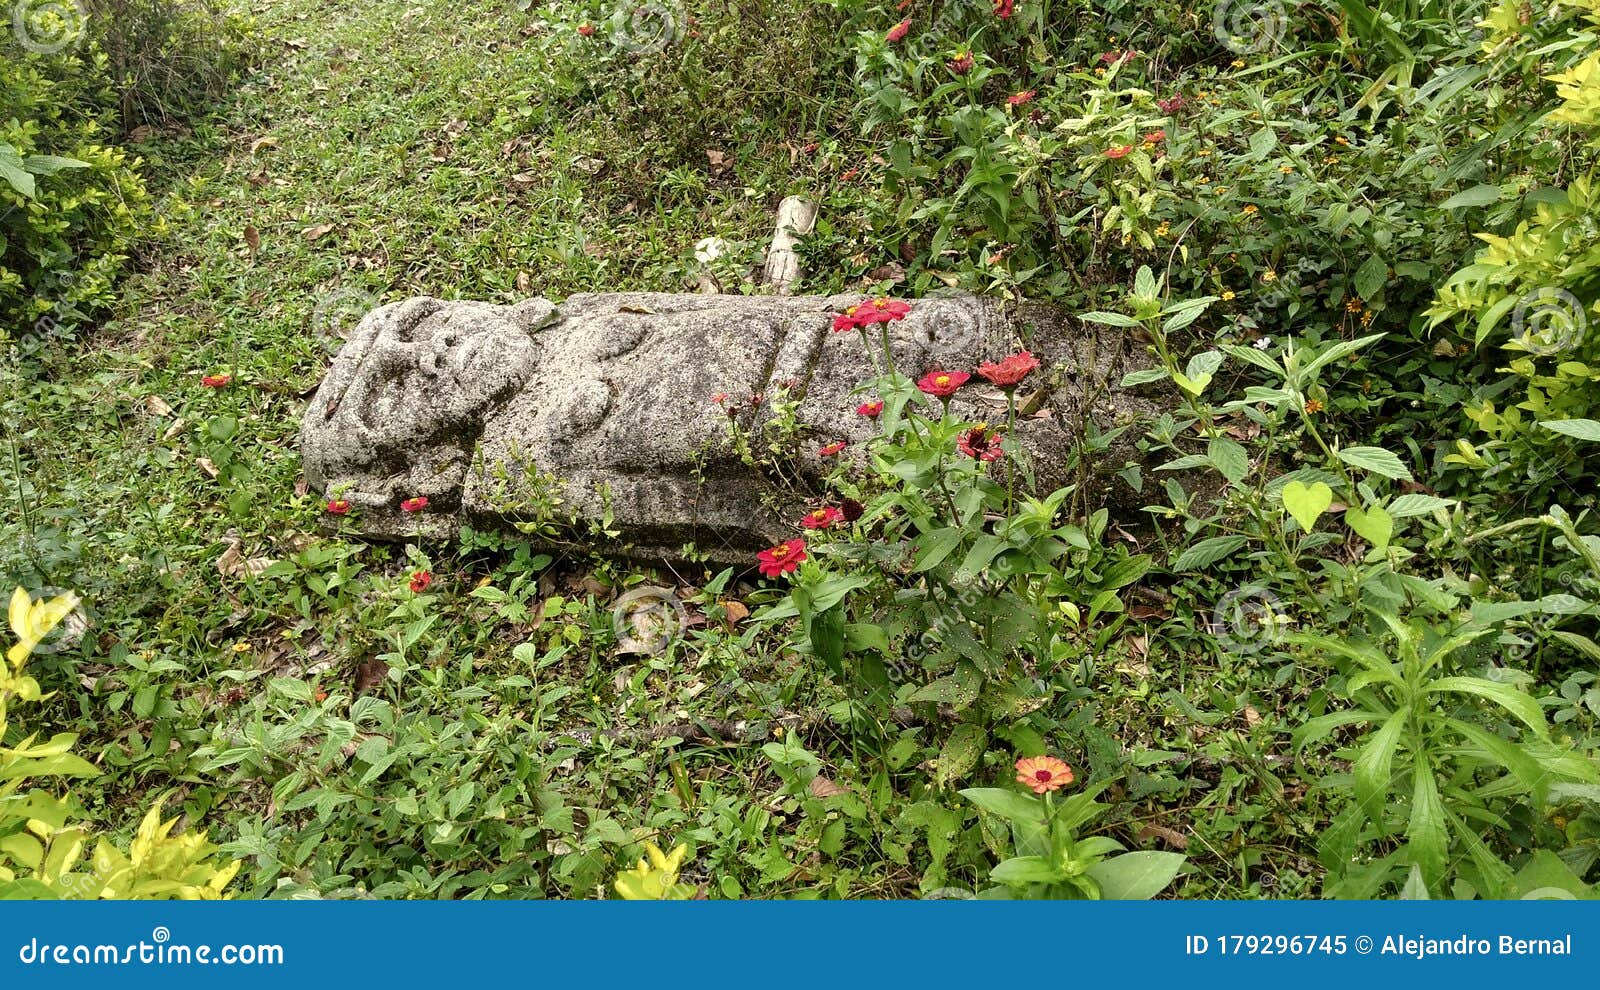 an ancient woman sculpture over grass with moss and red flowers at colombian san agustin archaeological park.